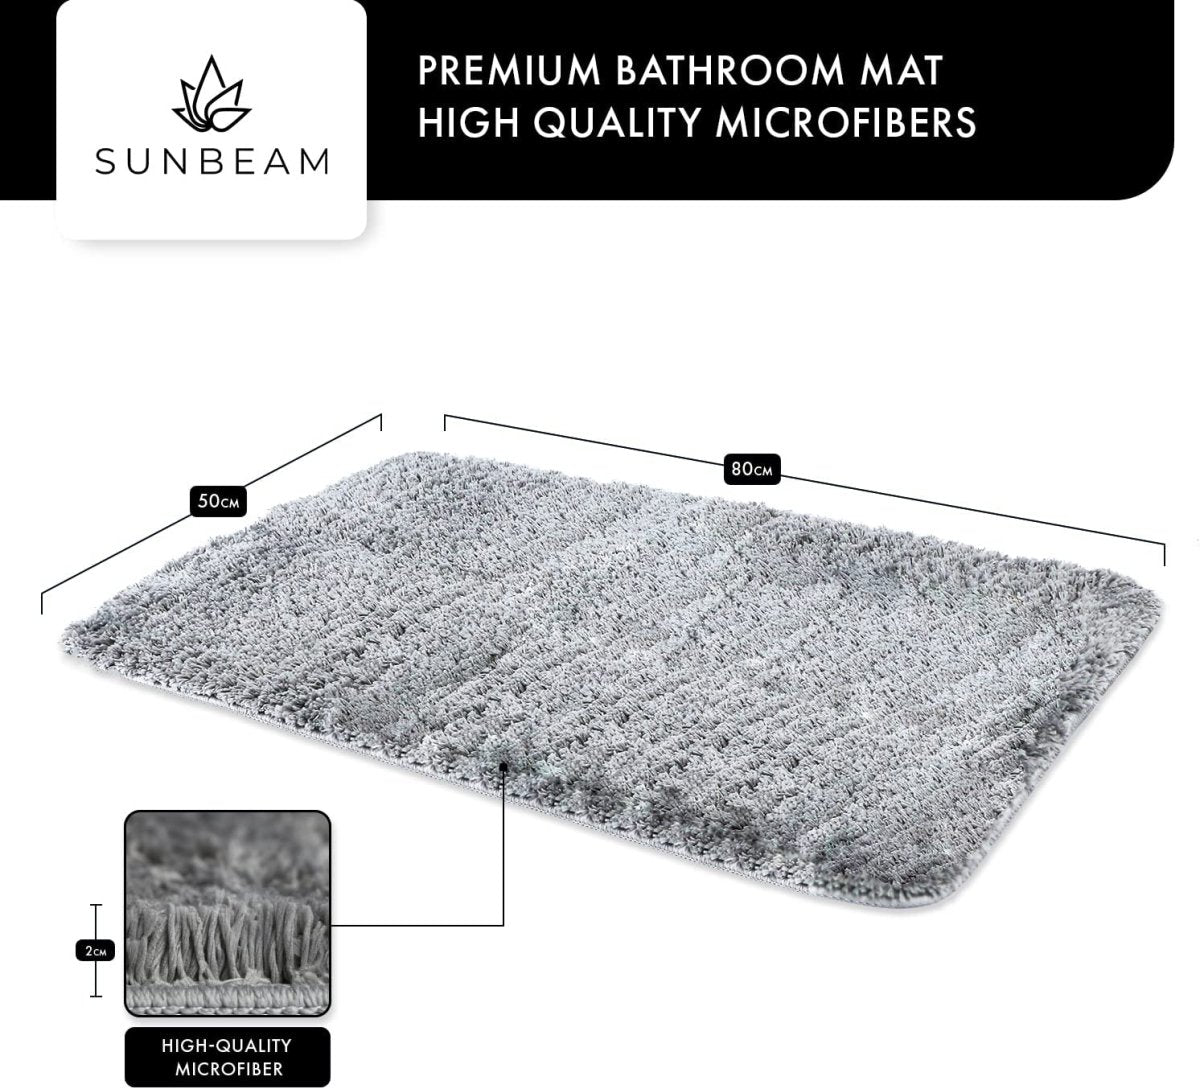 Fluffy Bathroom Shower Mat Water Absorbent & Machine Washable - (80 x 50 cm) - Slips Away - B09WHY2C72 -